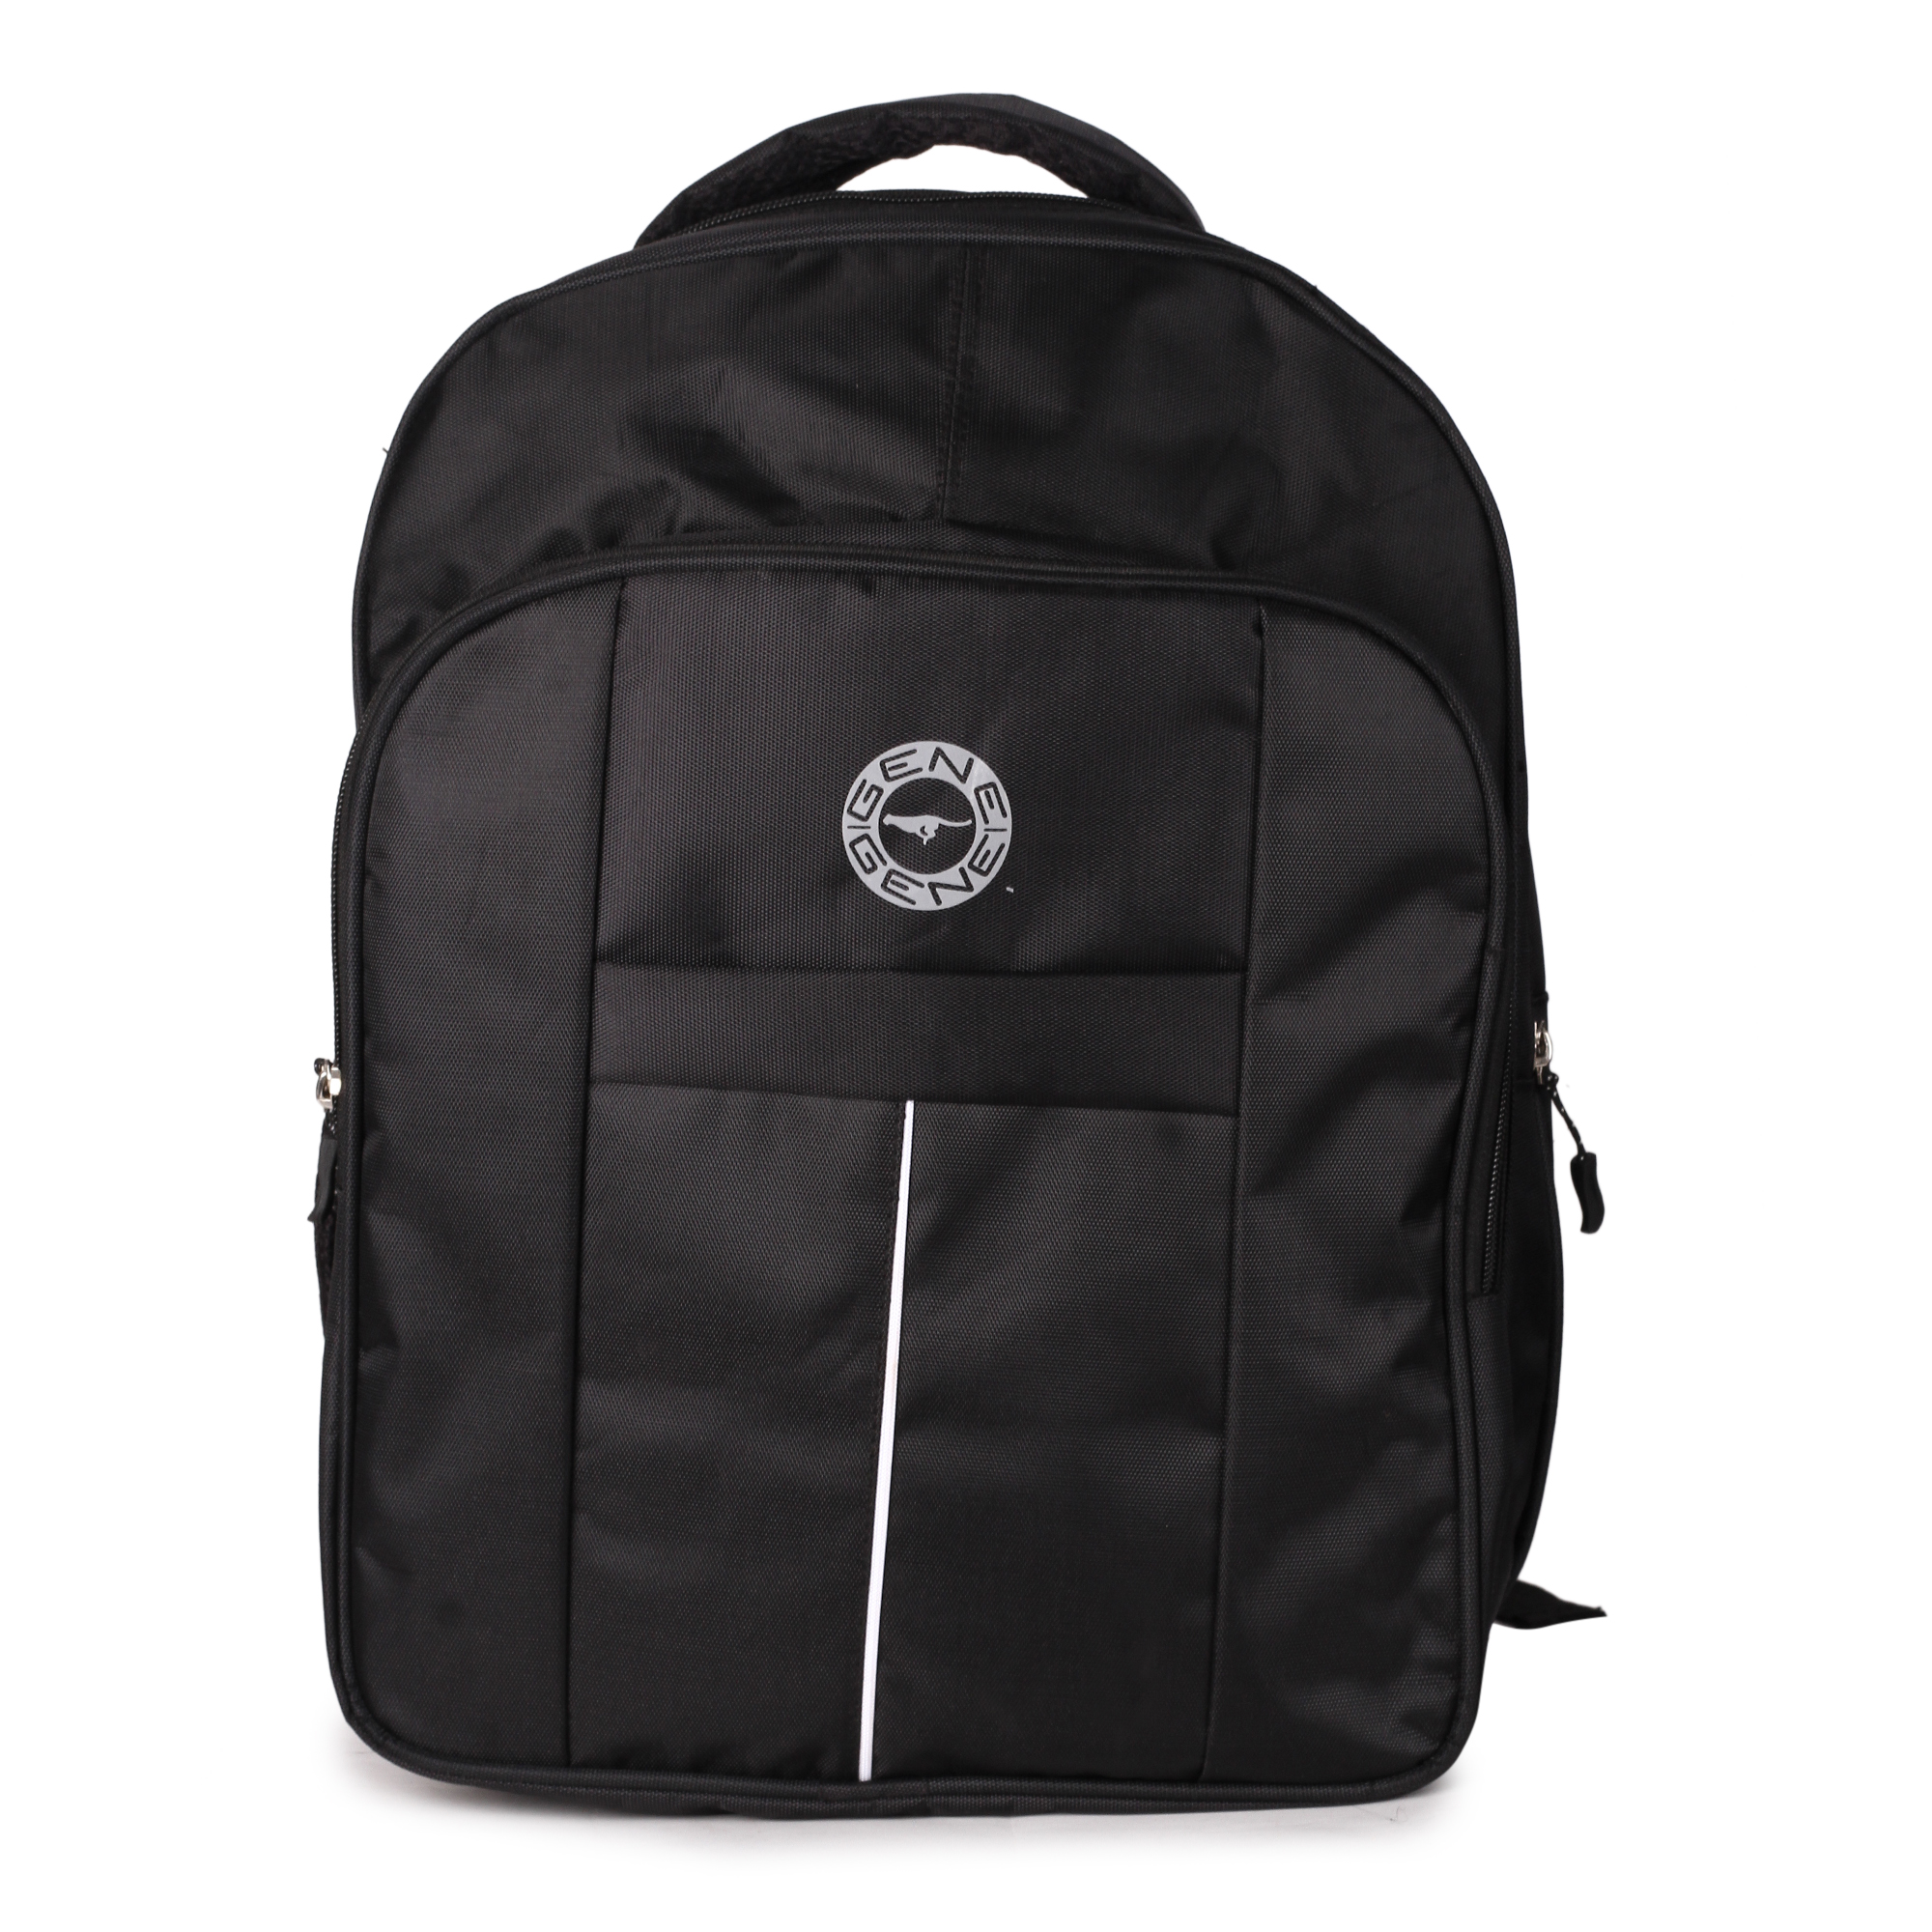 Duffle Polyester Gene Gym Bag, 21 X 10x 10 Inch at Rs 250 in New Delhi |  ID: 2851306867391